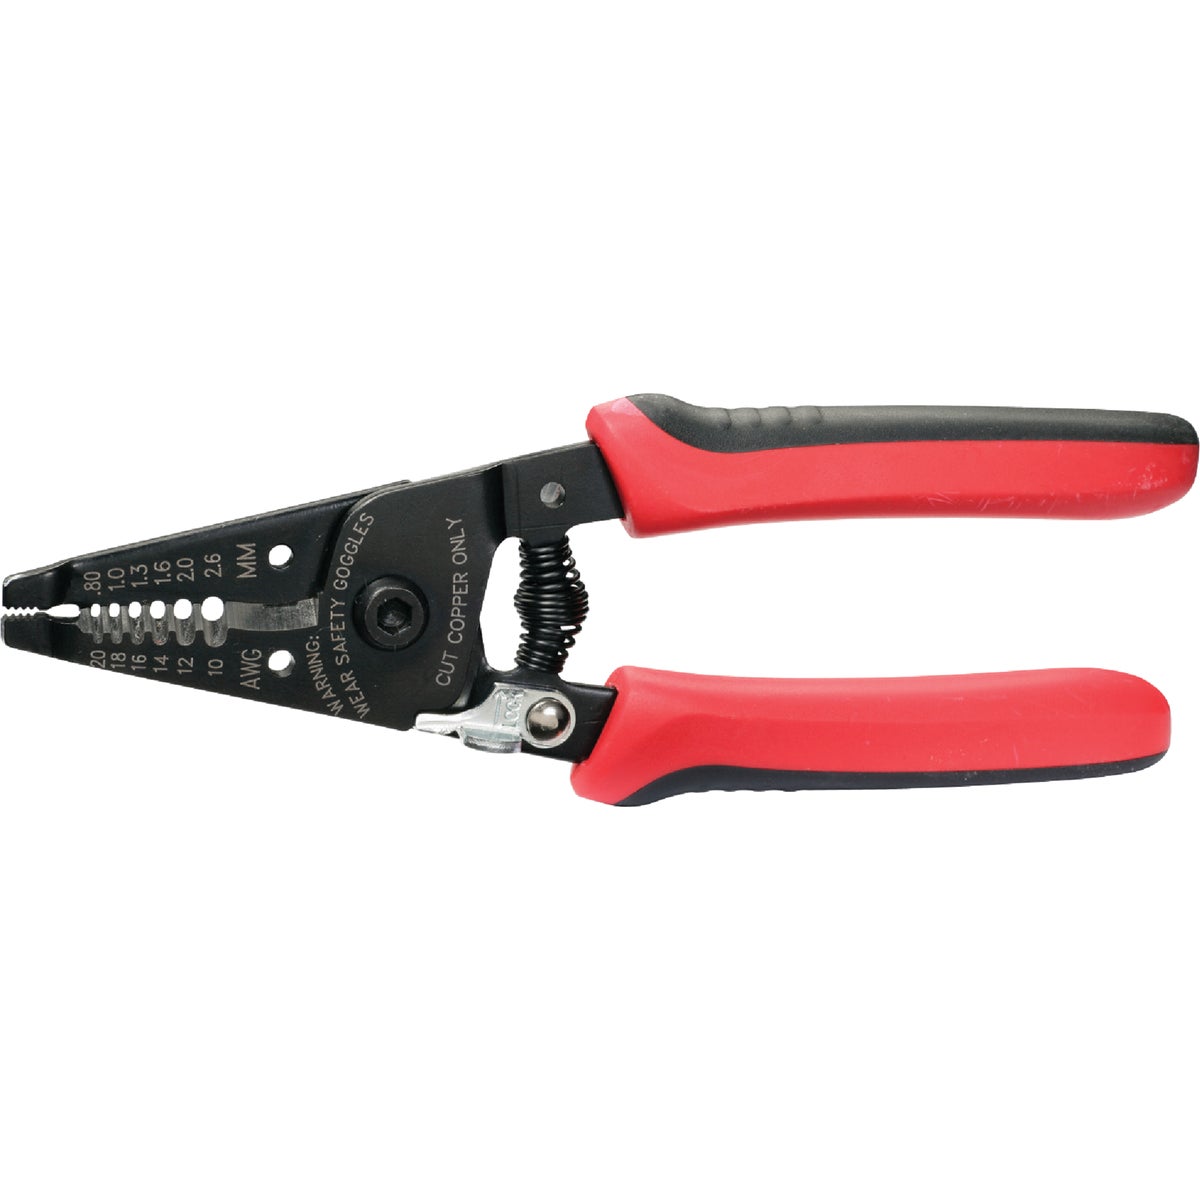 Item 517496, 6" wire stripper with lock strips sold or stranded wire with precision 